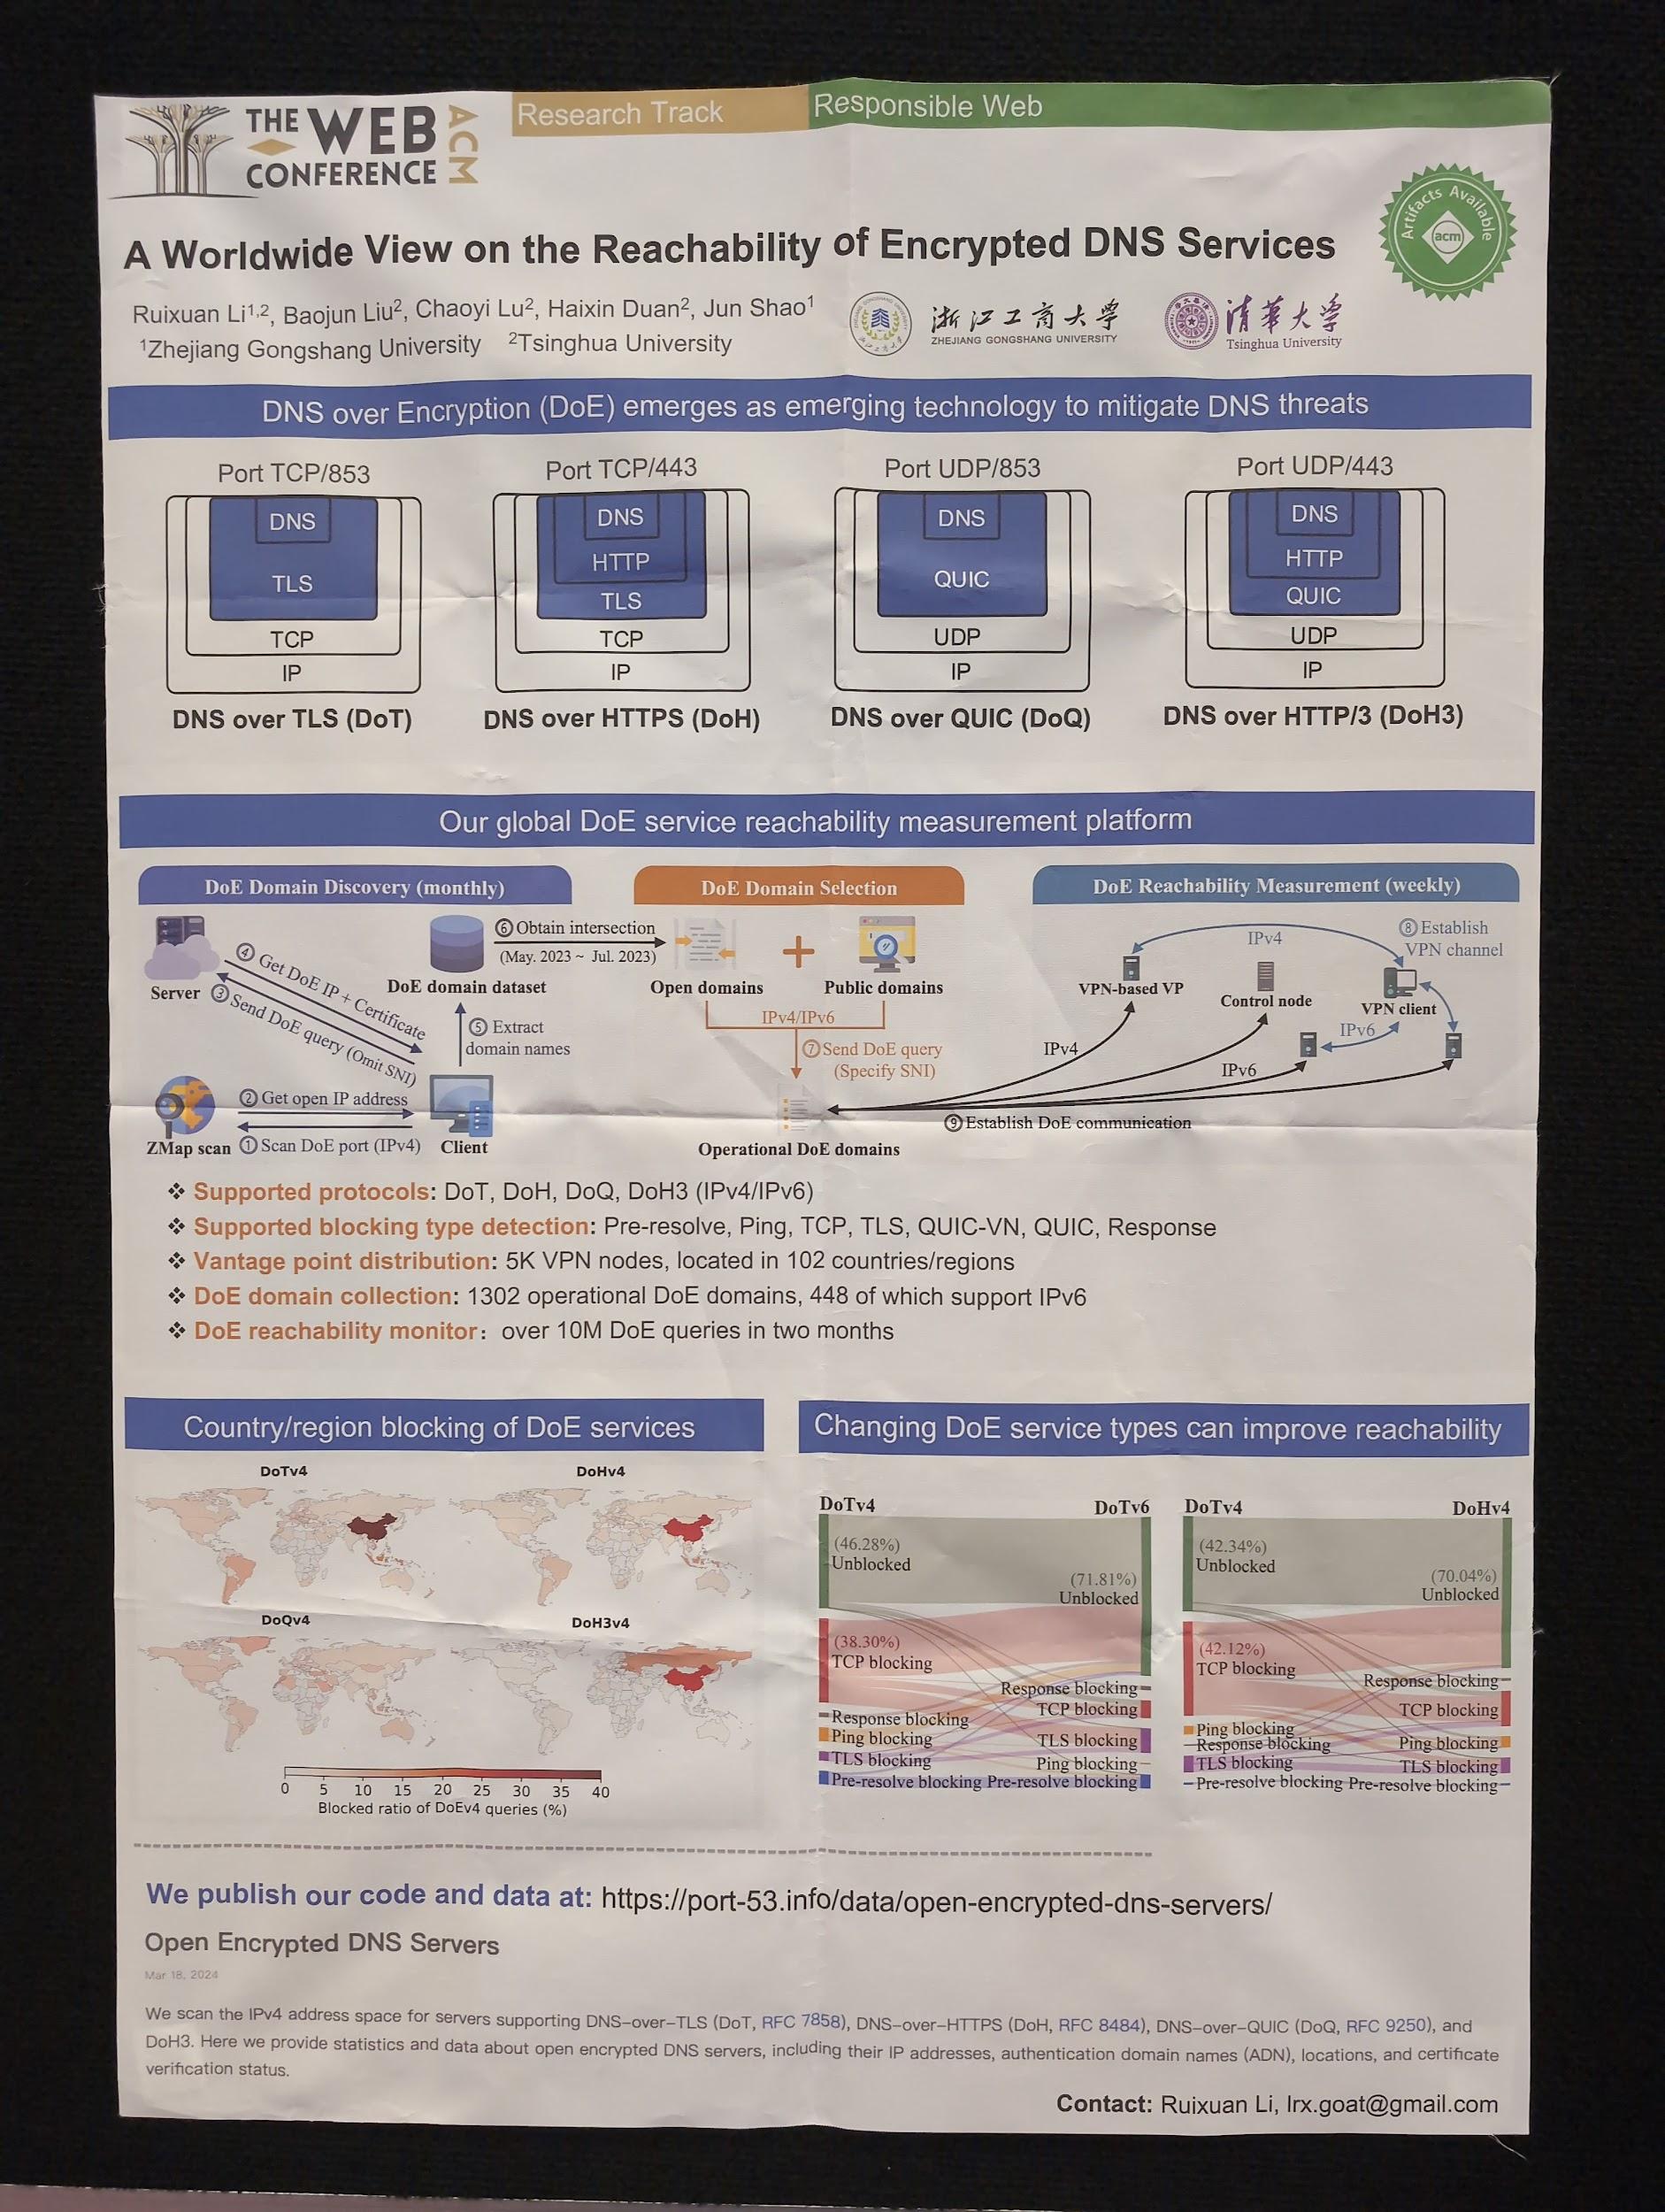 Poster for the 'A Worldwide View on the Reachability of Encrypted DNS Services' paper.